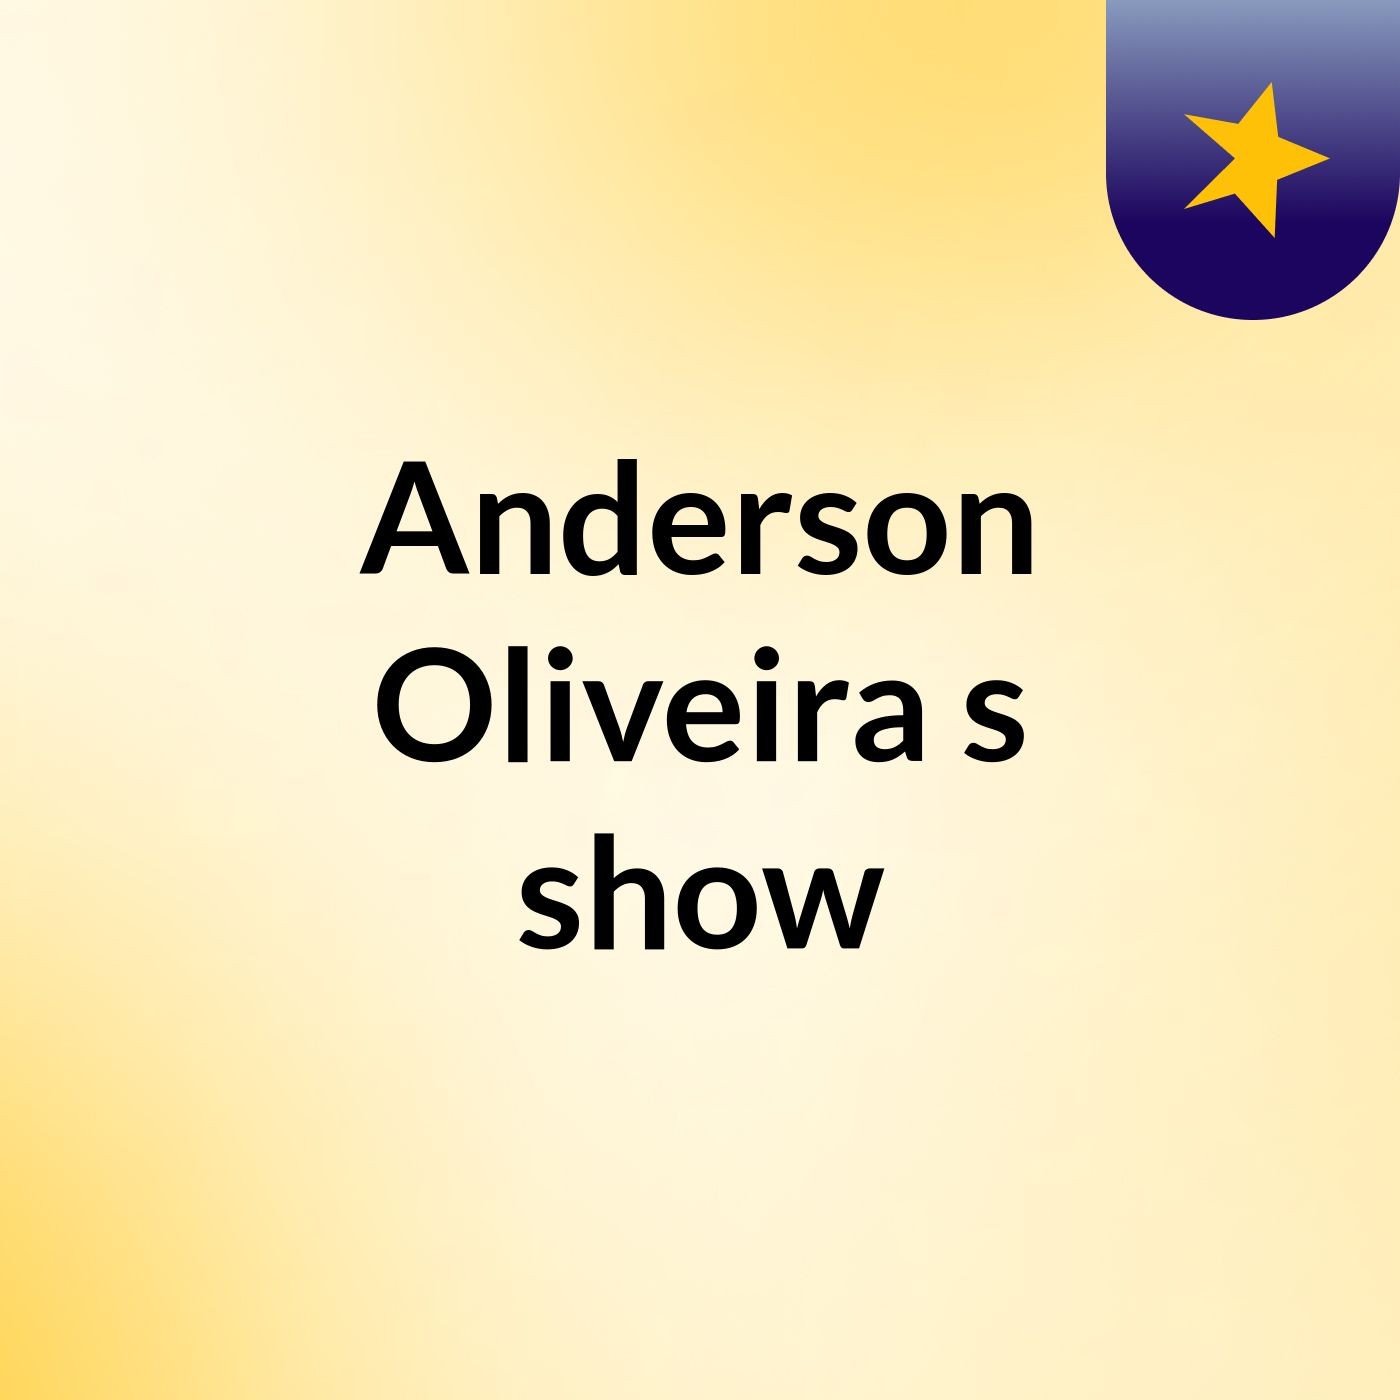 Anderson Oliveira's show